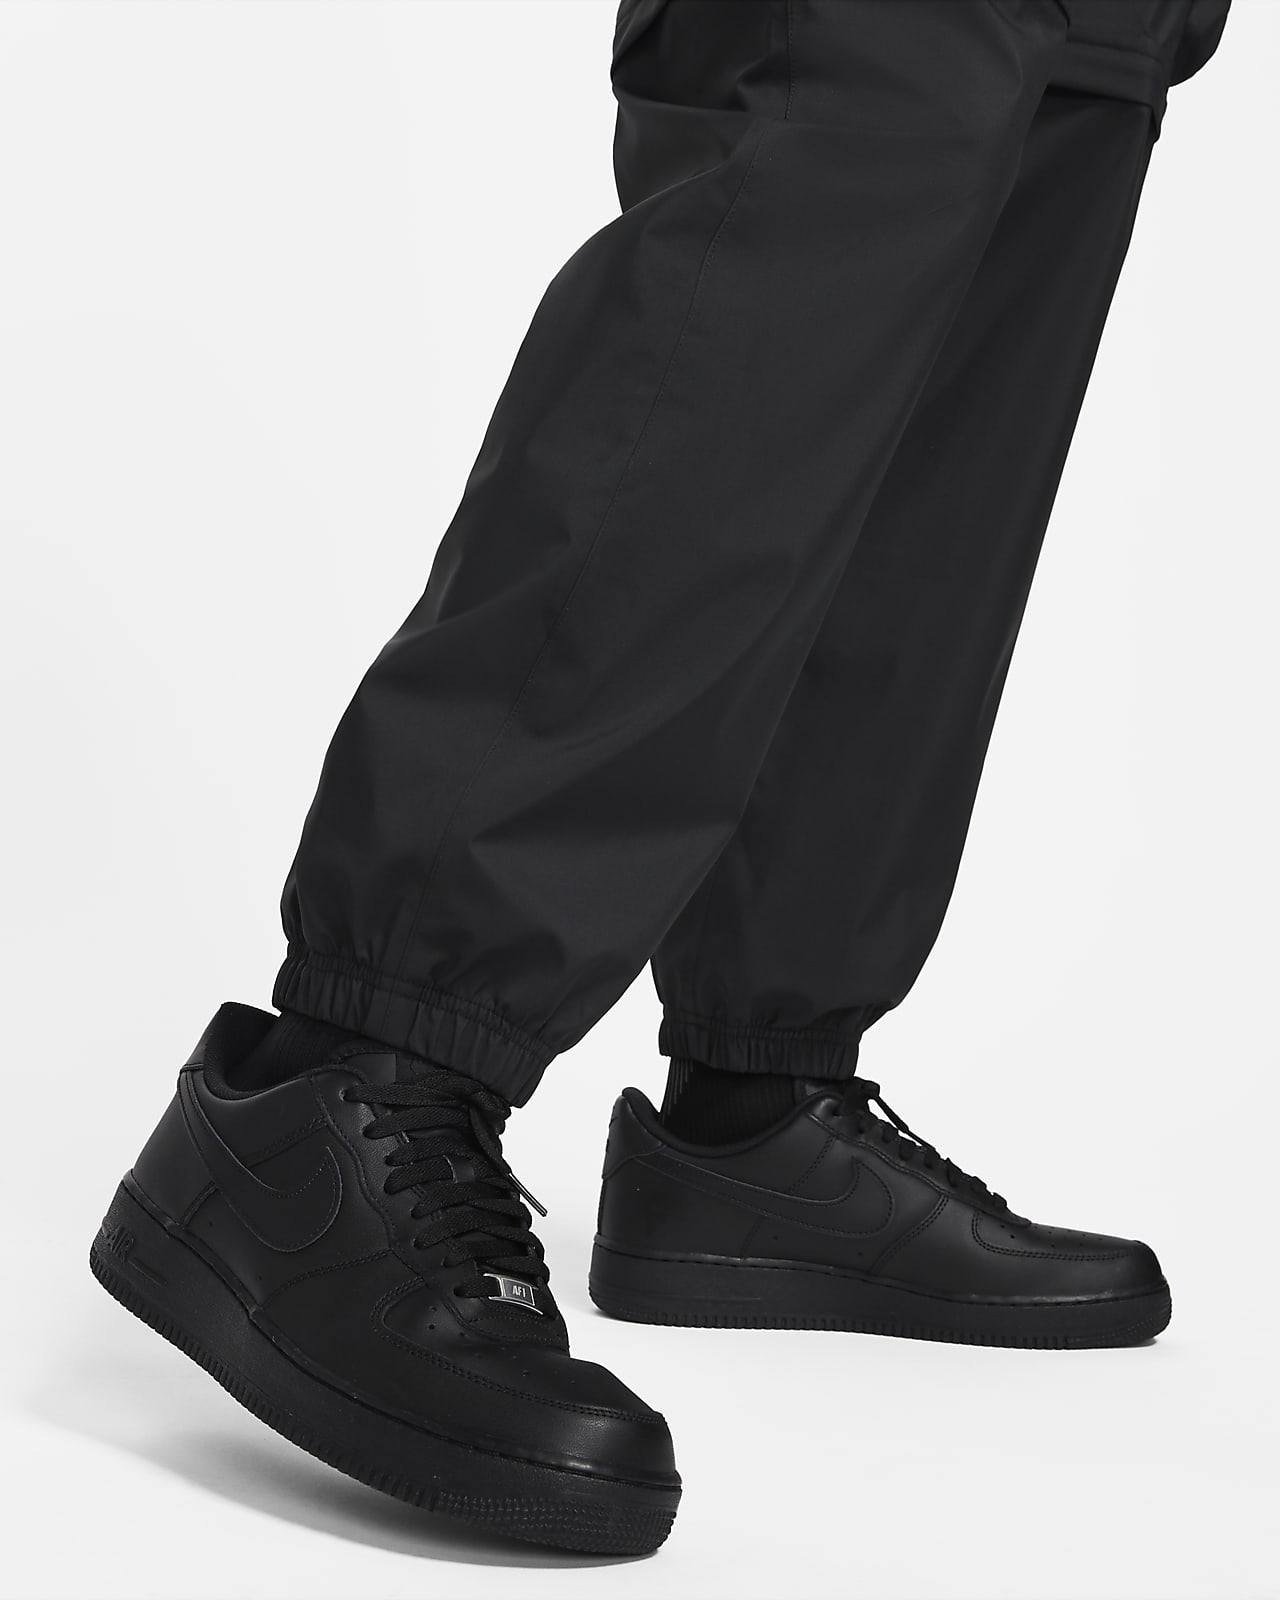 Nike x Undercover 2-In-1 Pants